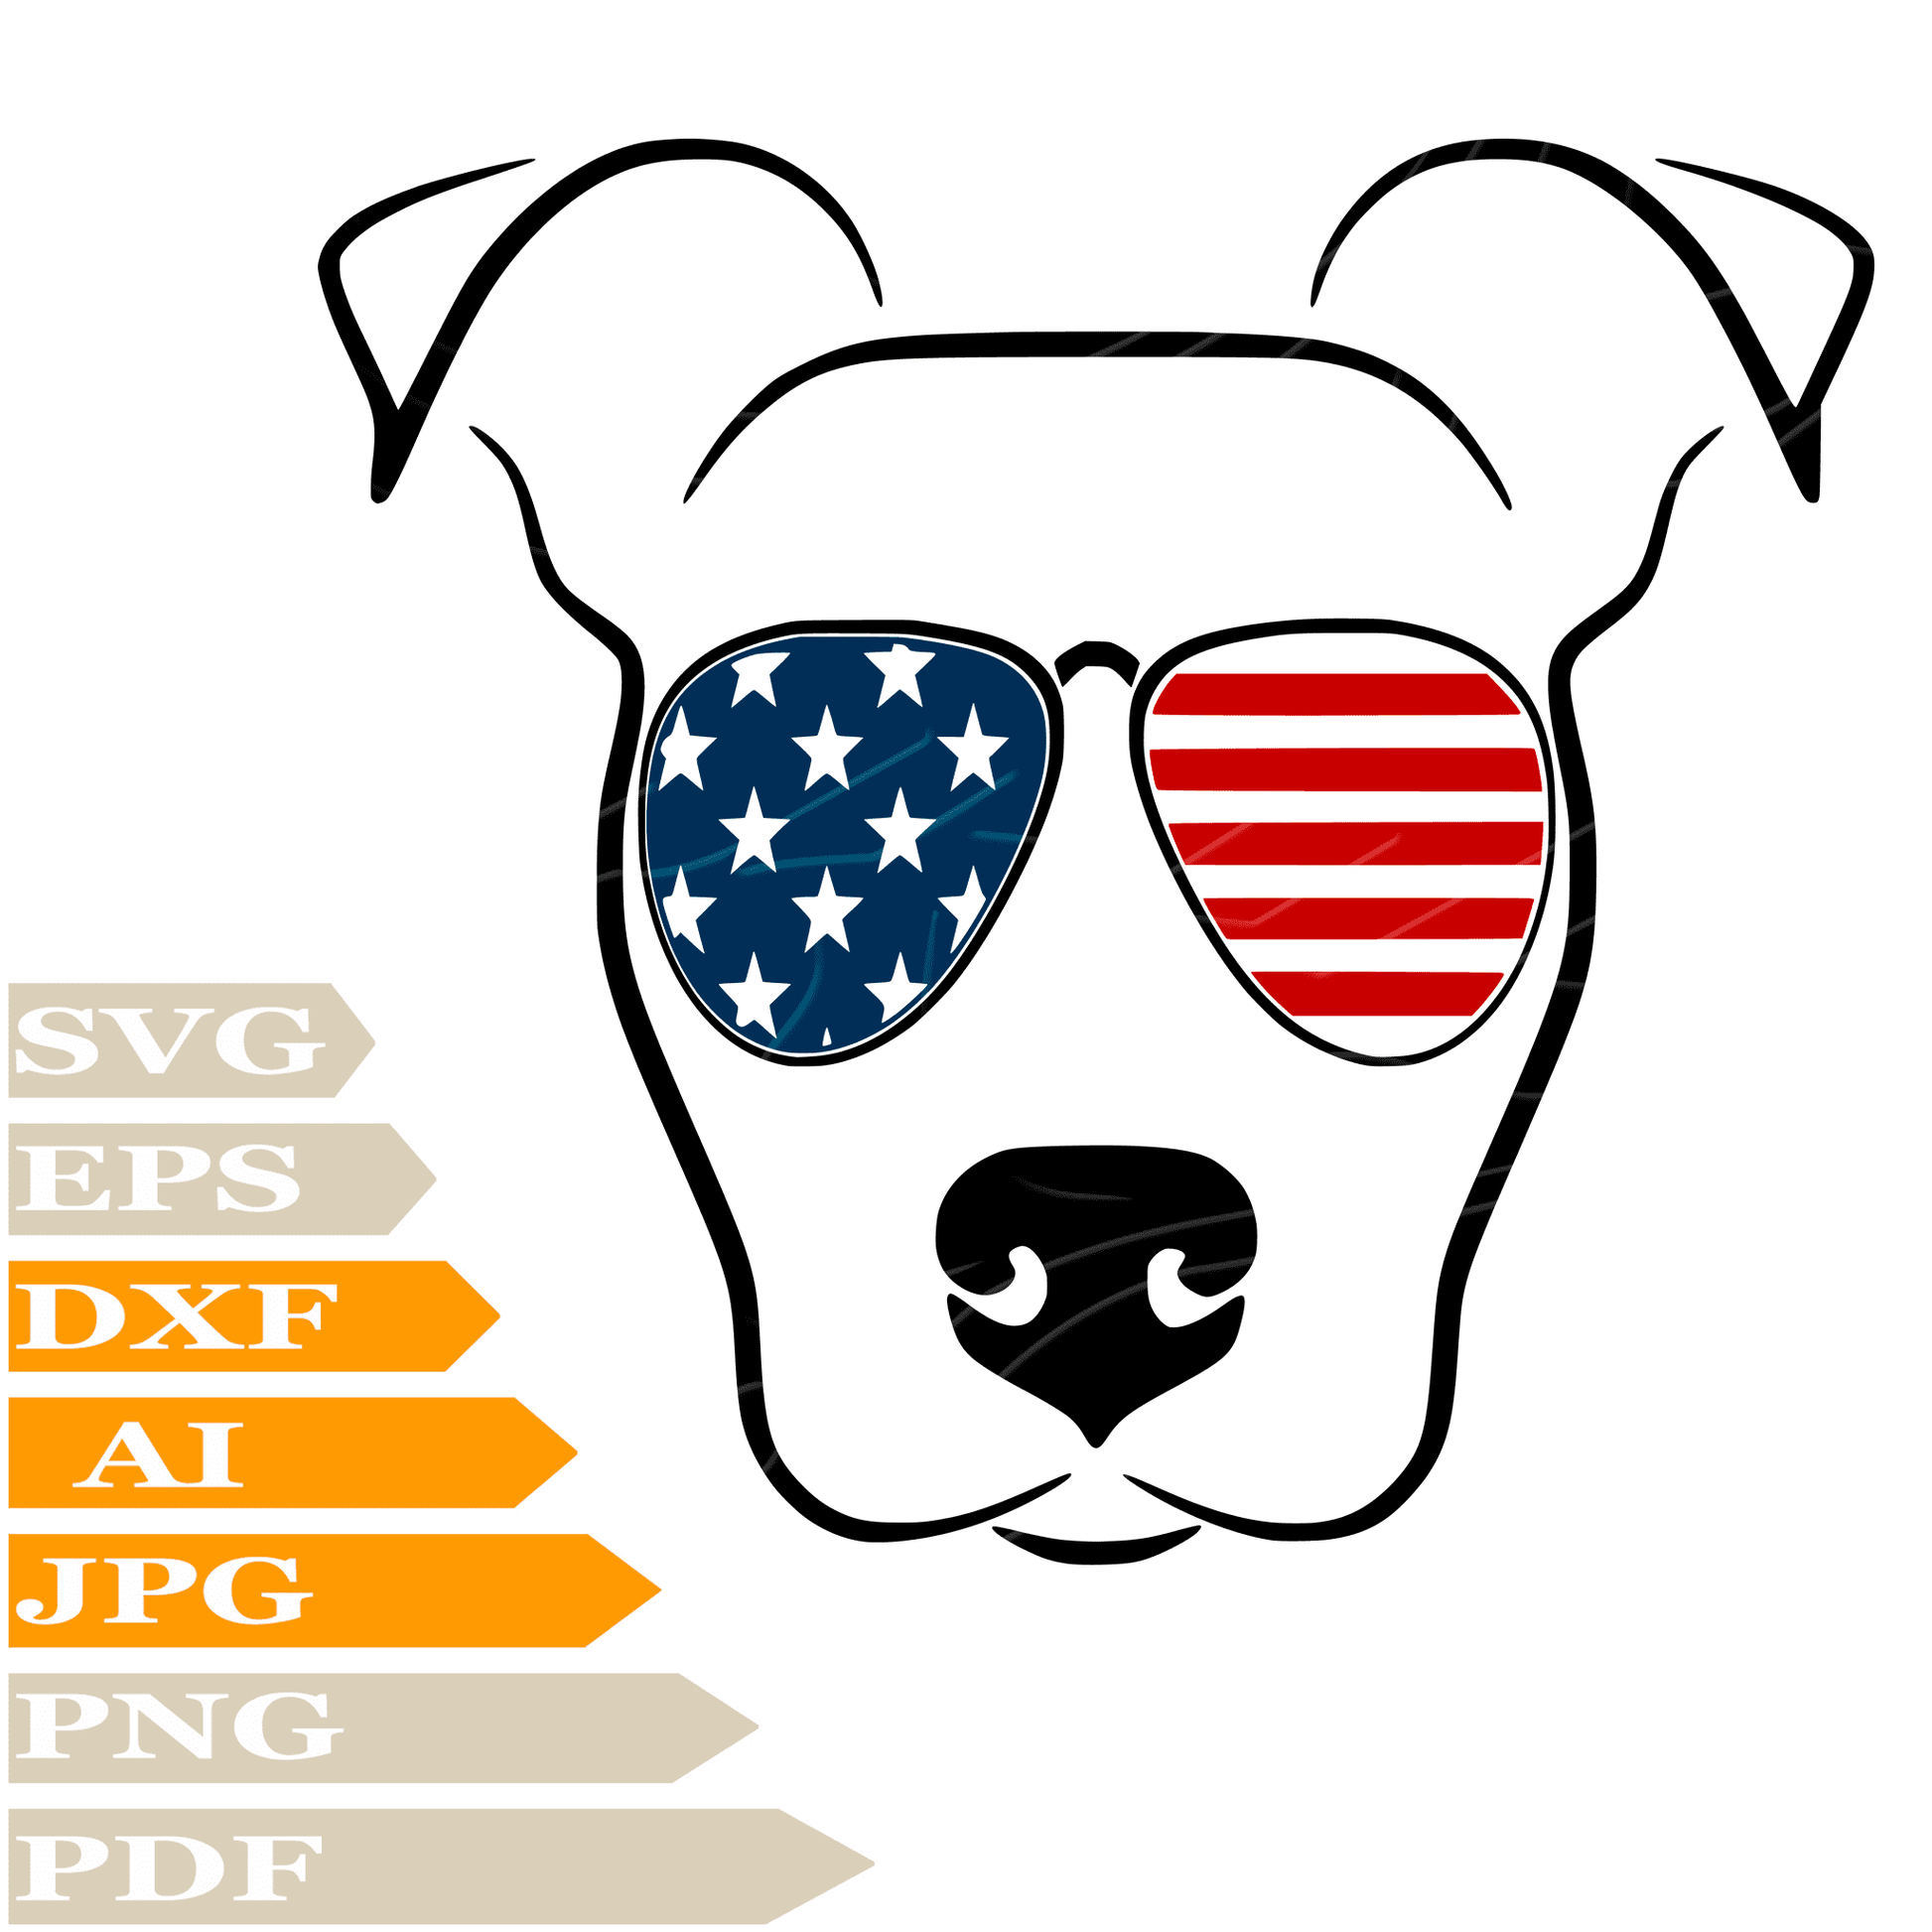 Cute Dog SVG File, Funny Cute Dog  SVG Design, Dog  With Sunglasses Vector Graphics, Dog Head PNG, Cricut, Image Cut, Clipart,  For Tattoo, Cut File, Silhouette